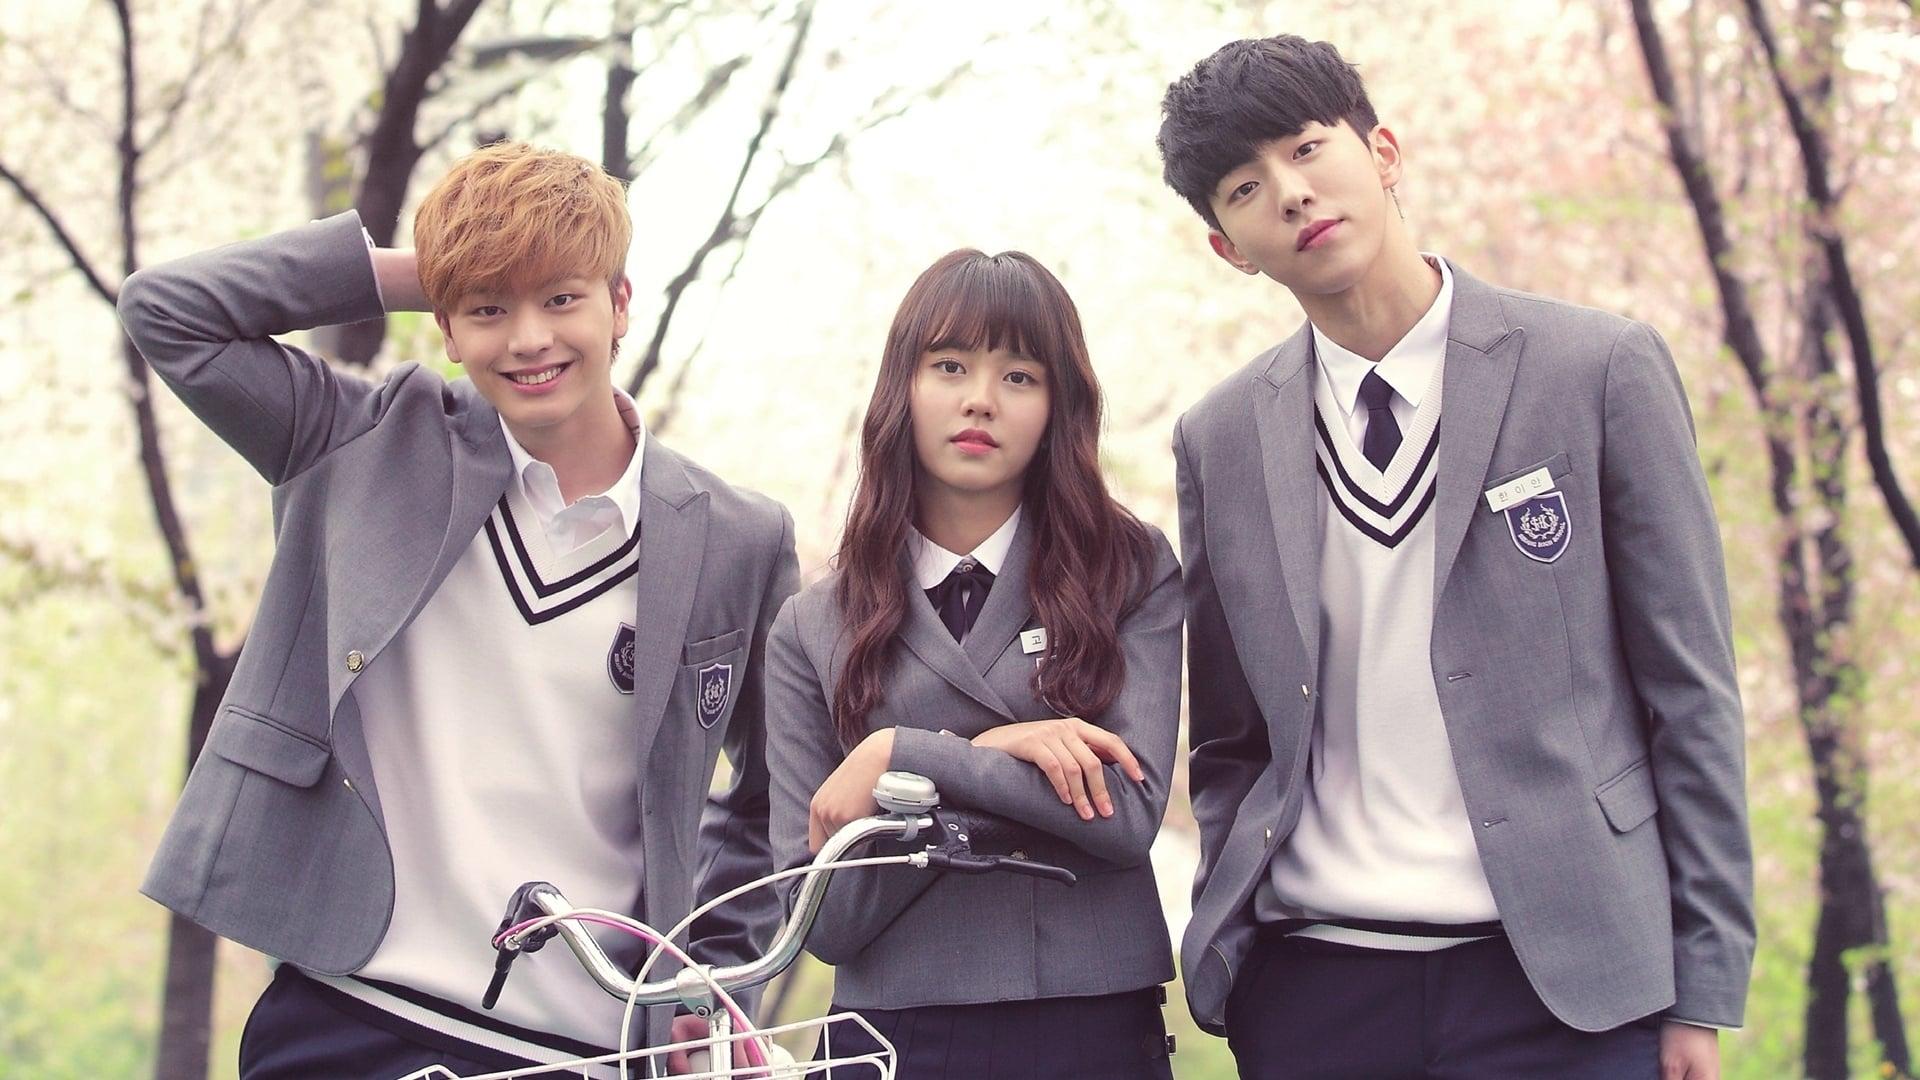 Who Are You: School 2015 backdrop